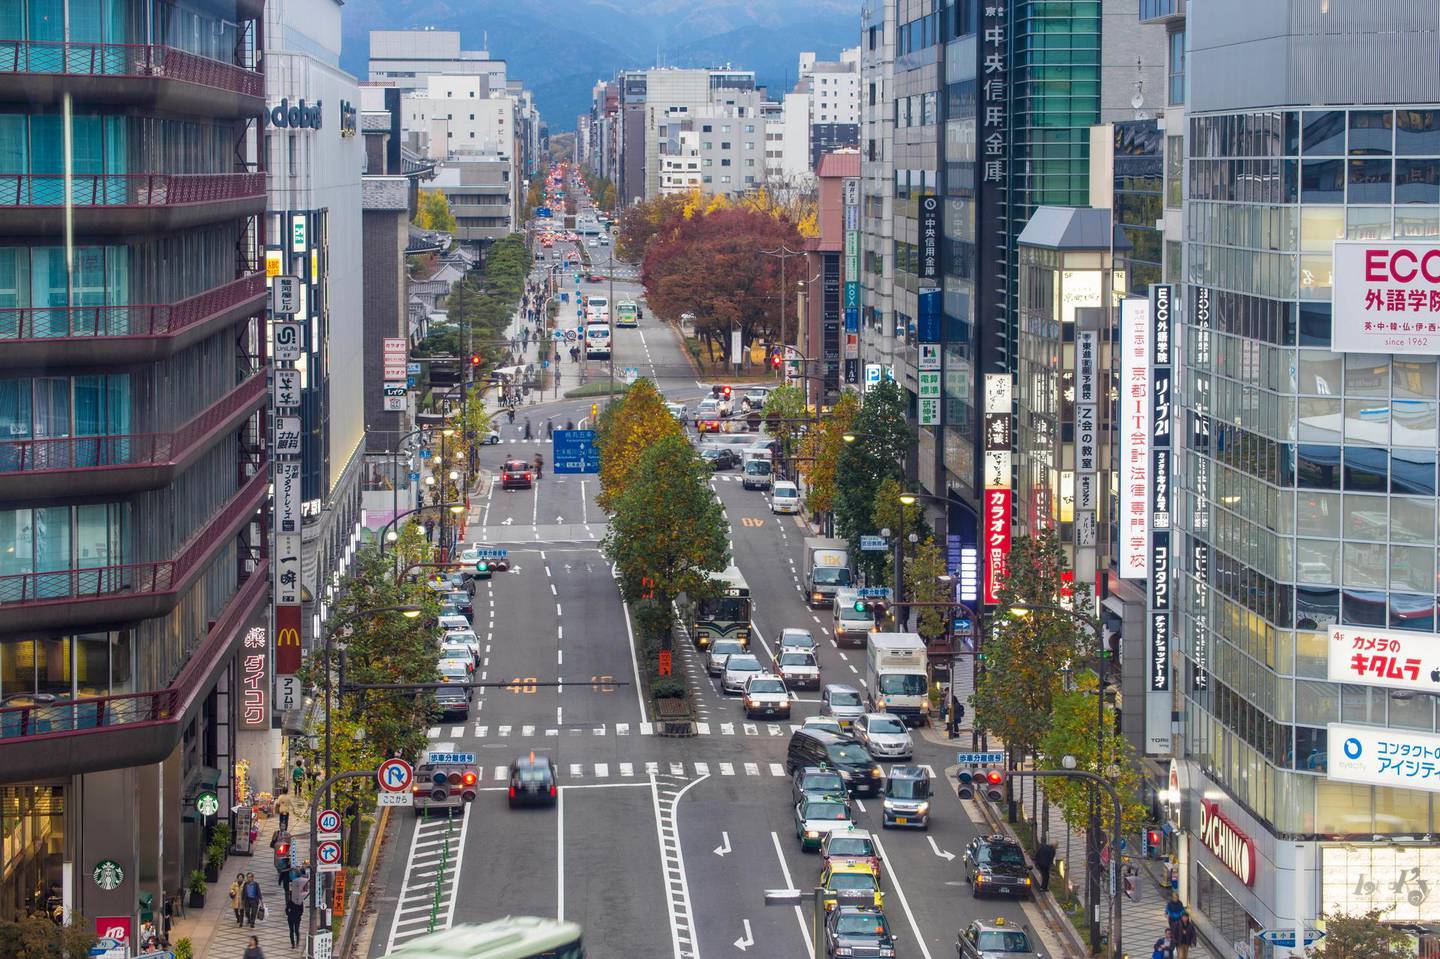 Japan, Kyoto, Street opposite Kyoto railway station. Getty Images